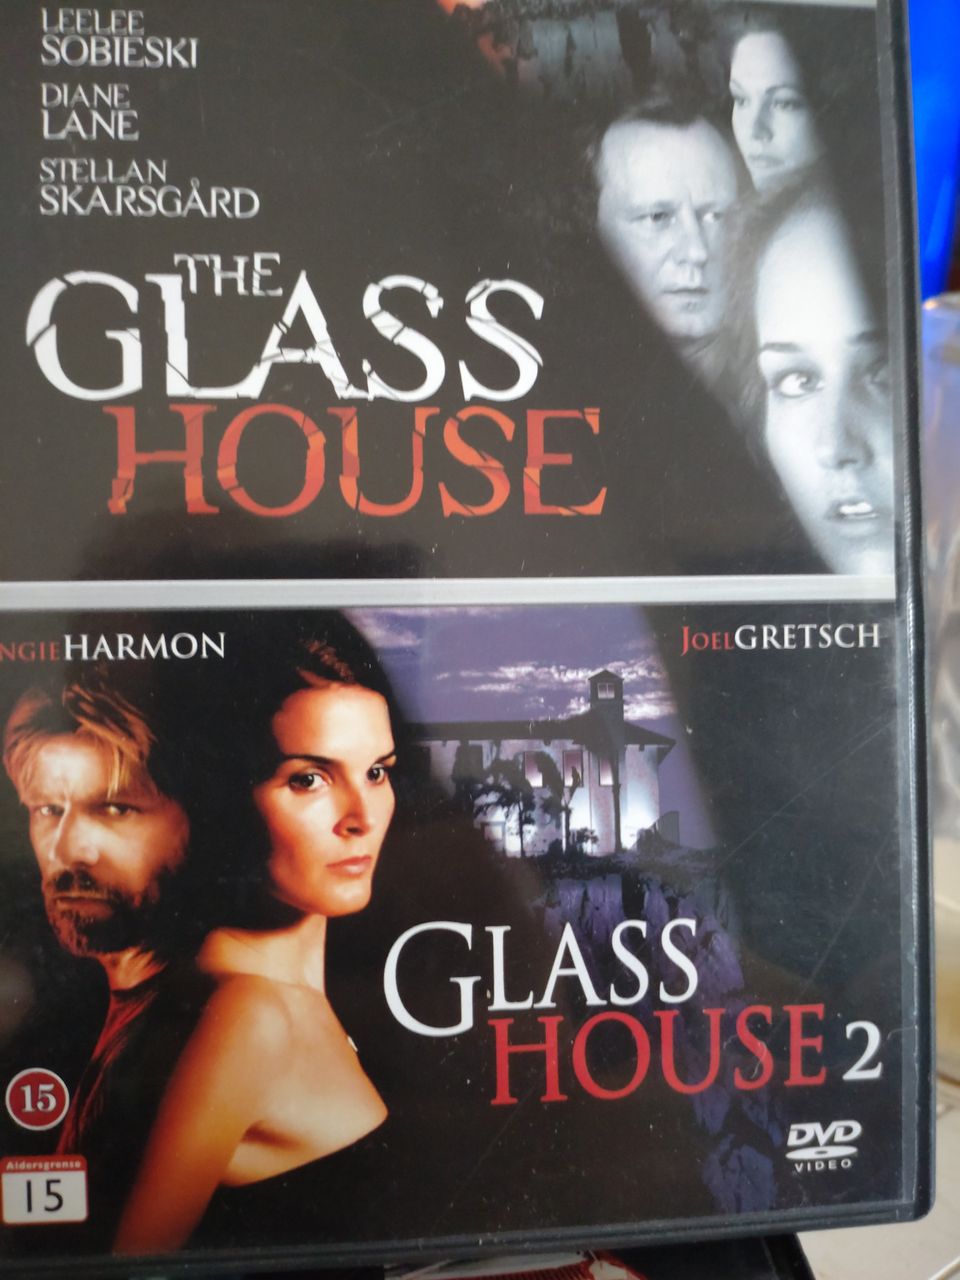 The glass house 1+2